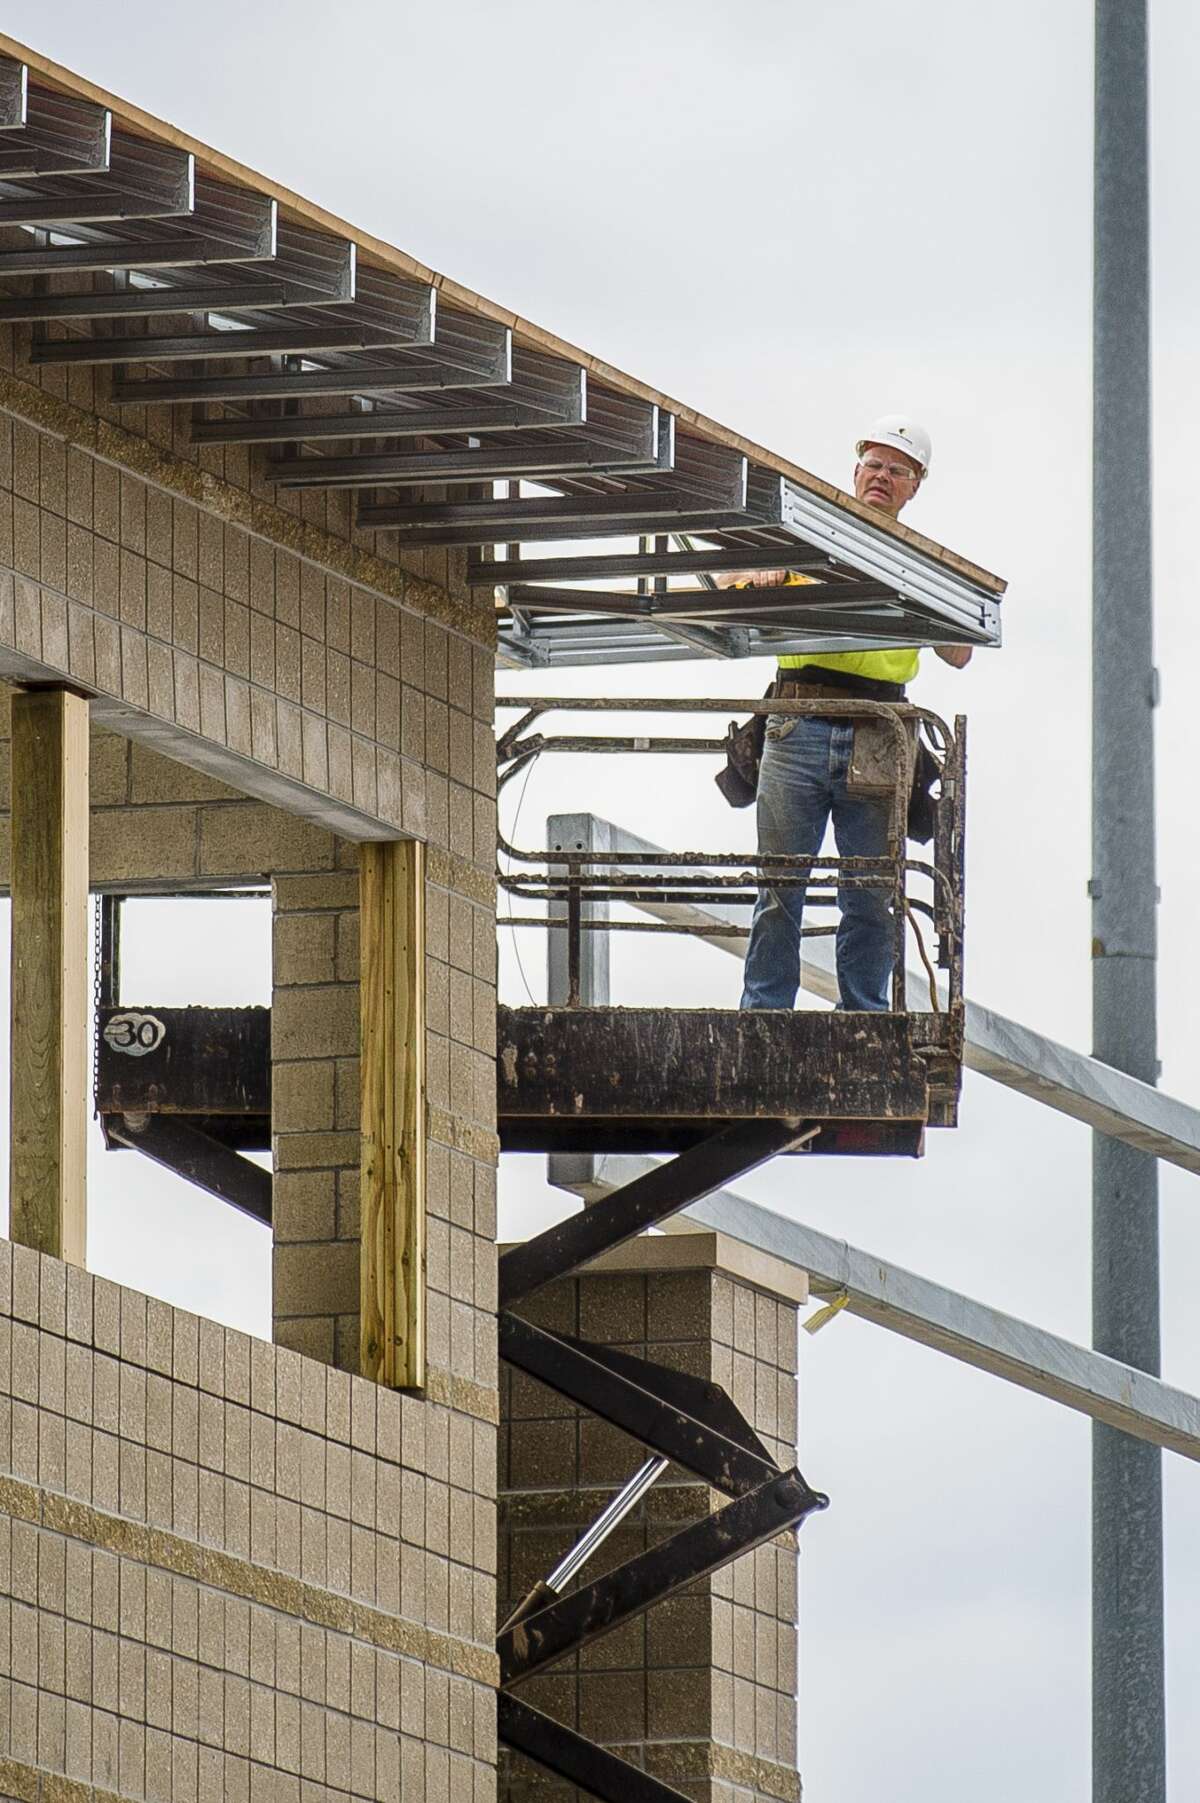 Construction workers with Three Rivers Corporation work on the new press box at Midland Community Stadium on Tuesday, July 23, 2019. (Katy Kildee/kkildee@mdn.net)